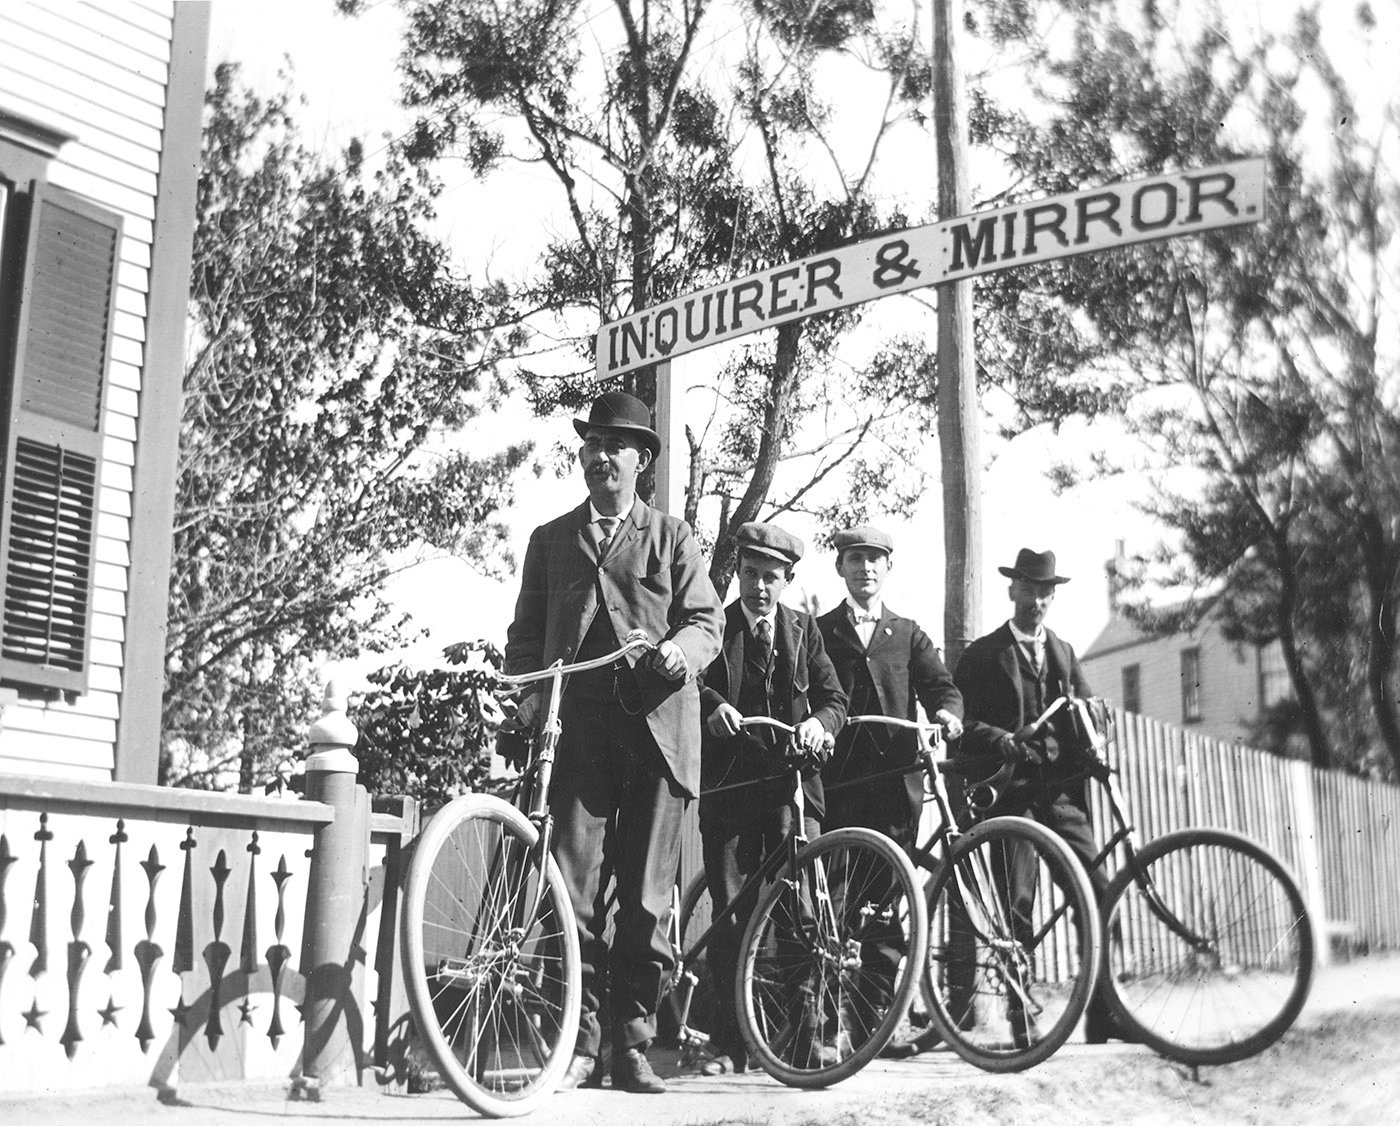 Inquirer and Mirror publisher Roland B. Hussey, 15-year-old Harry B. Turner, an unidentified friend and publisher Arthur H. Cook were part of a bicycle club in the early 1890s.